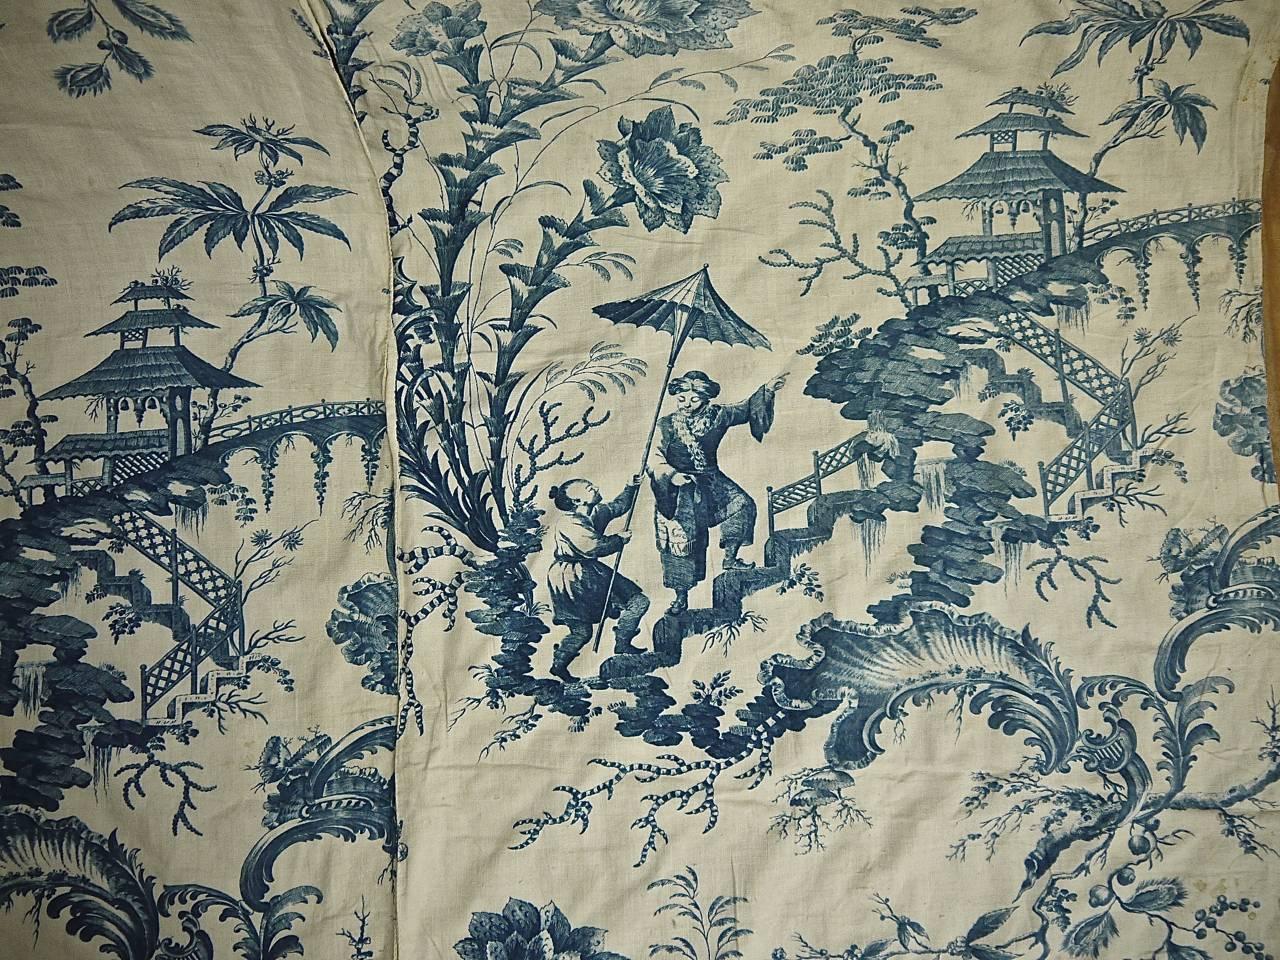 Cotton Pair of 18th Century French Antique Chinoiserie Toile Blue and White Curtains